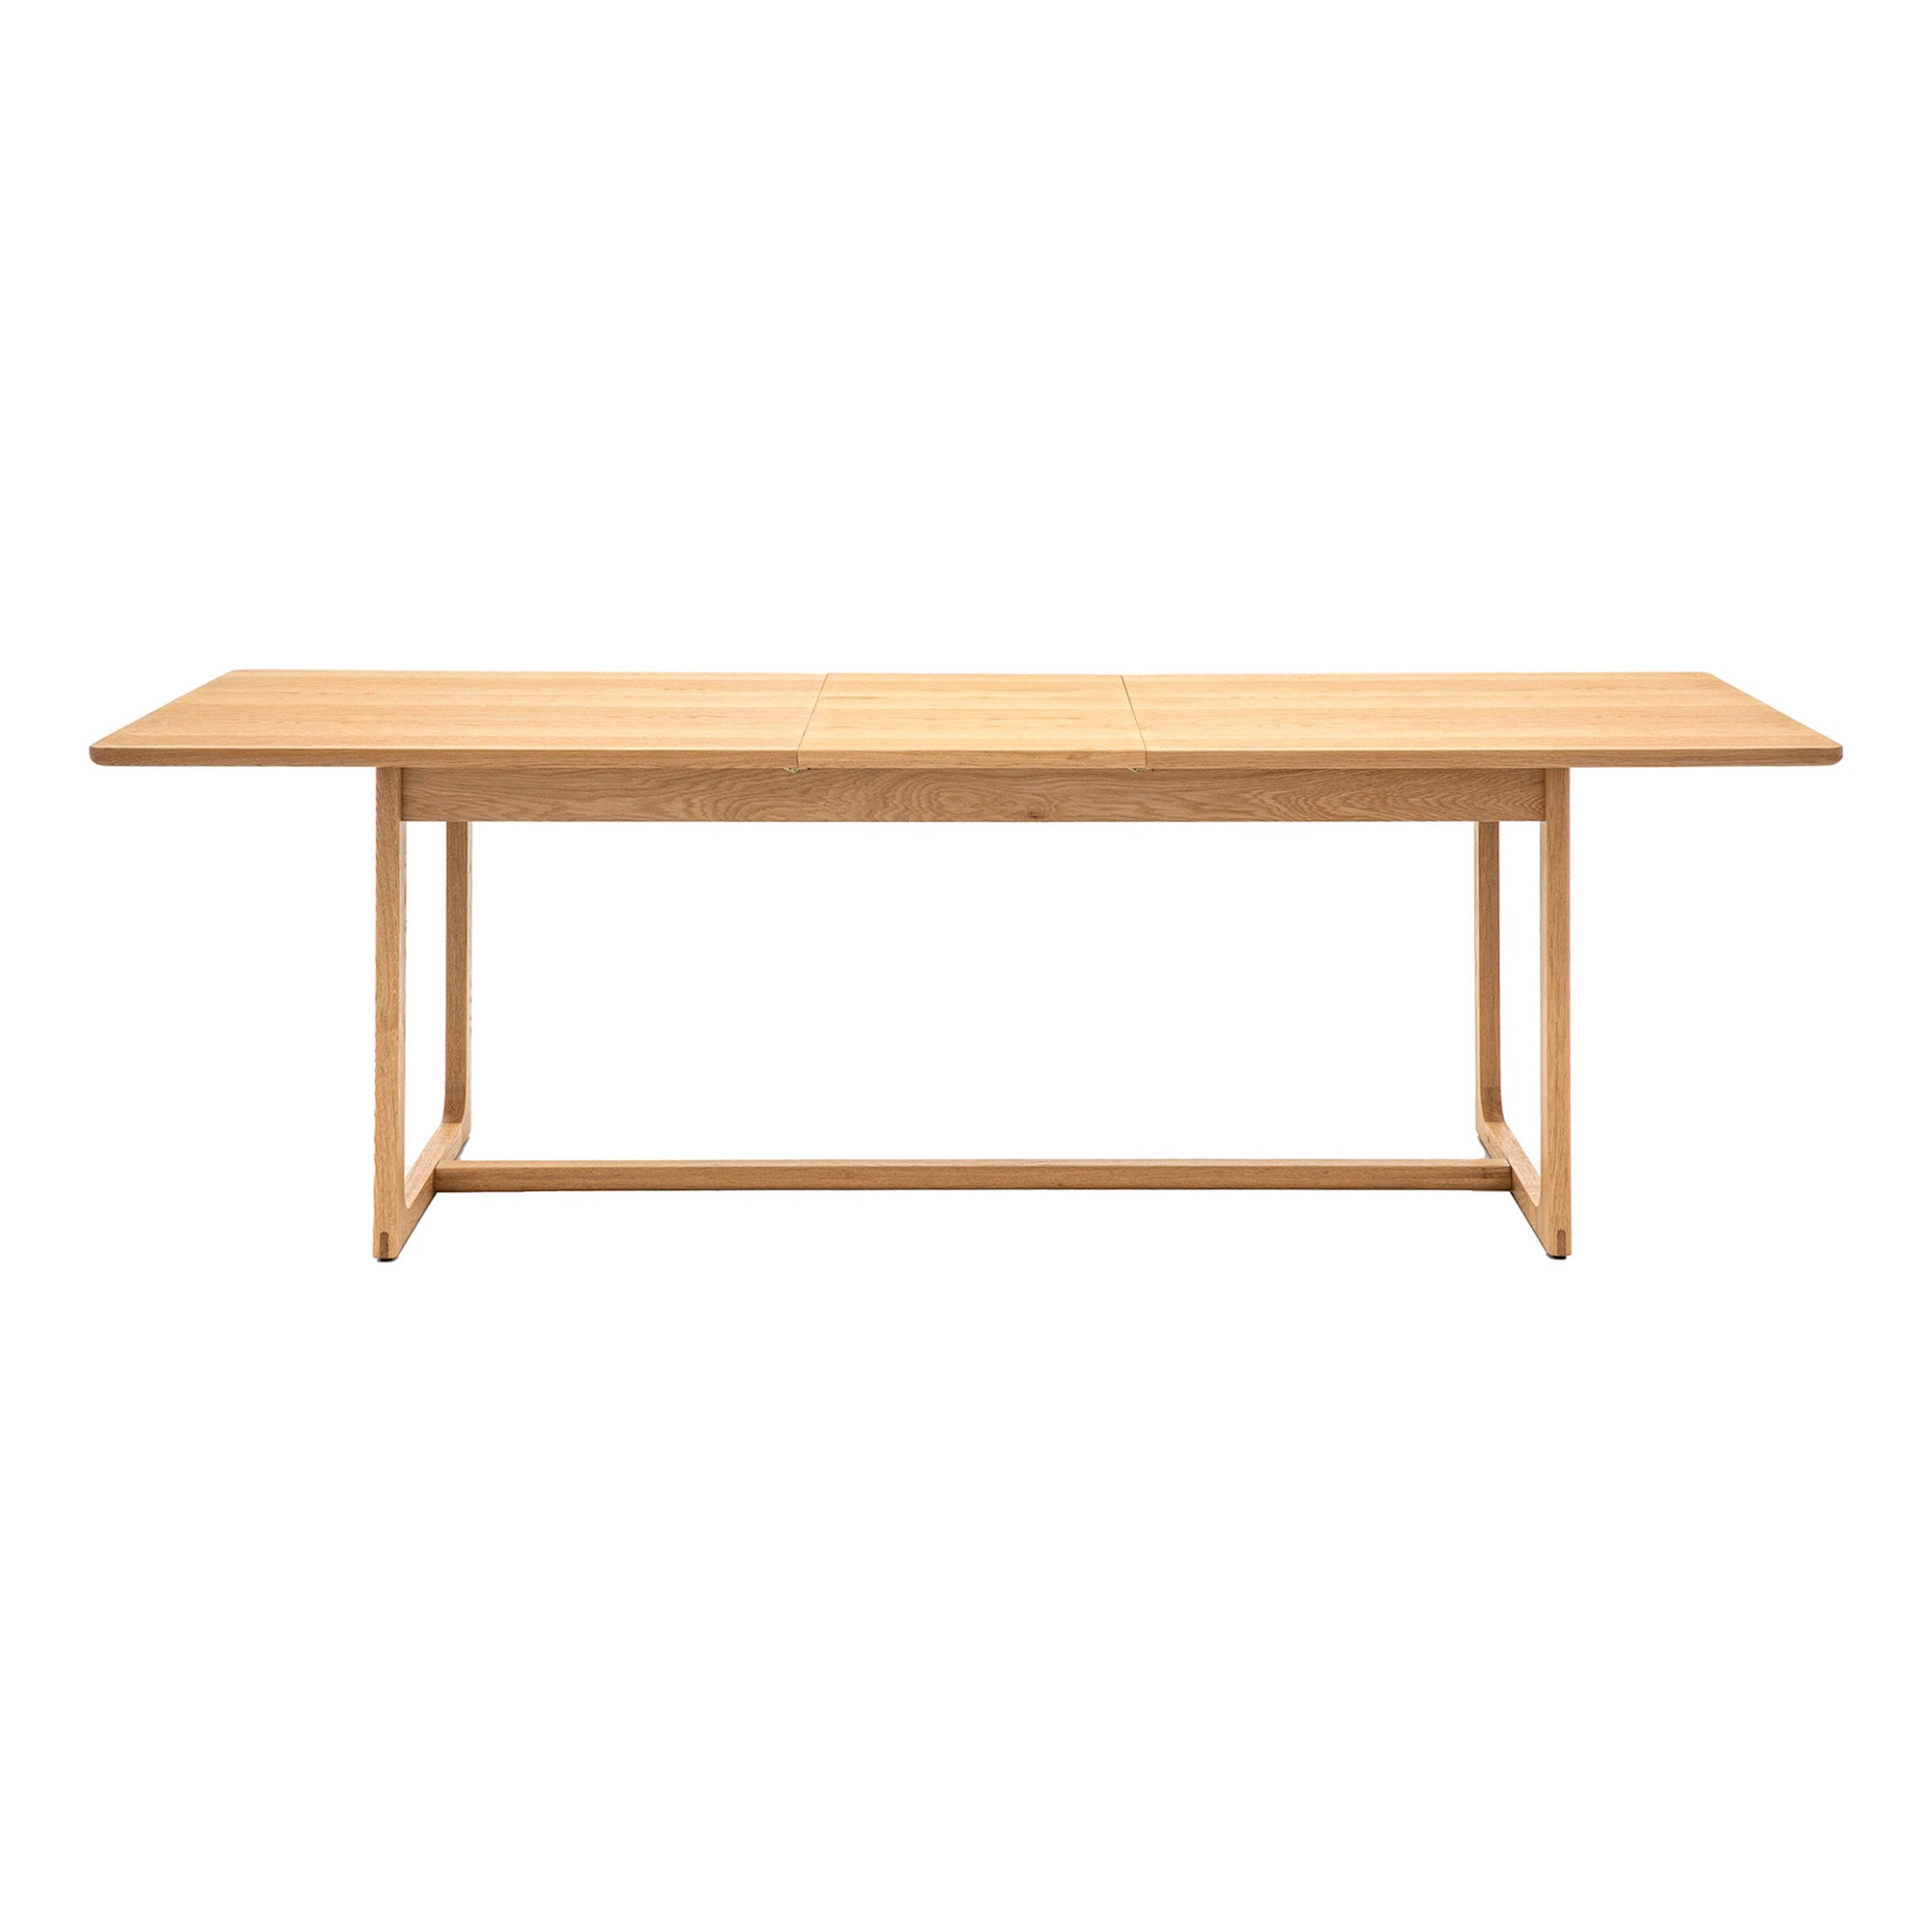 The Finest Extendable Wooden Dining Table